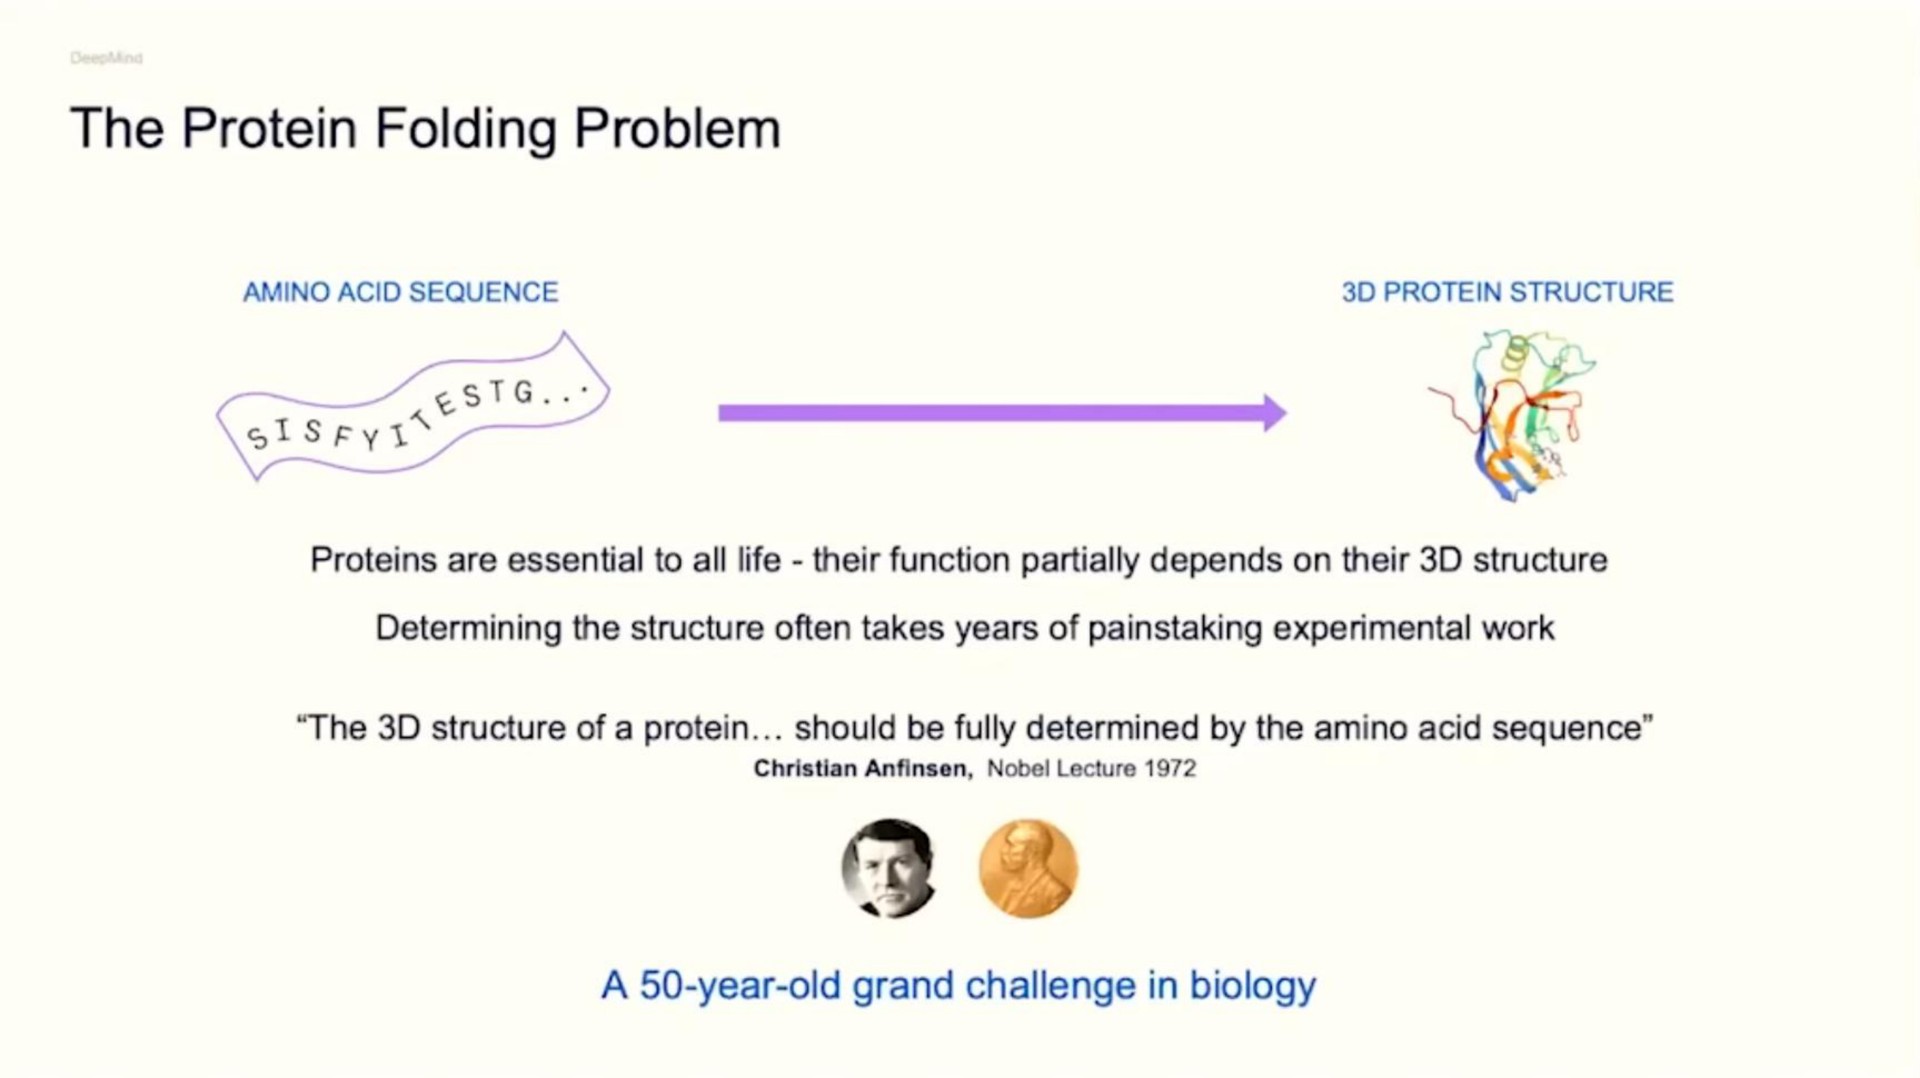 the protein folding problem amino acid sequence pecan protein structure proteins are essential to all life their function partially depends on their structure determining the structure often takes years of painstaking experimental work the structure of a protein should be fully determined by the amino acid sequence lecture a year old grand challenge in biology | DeepMind